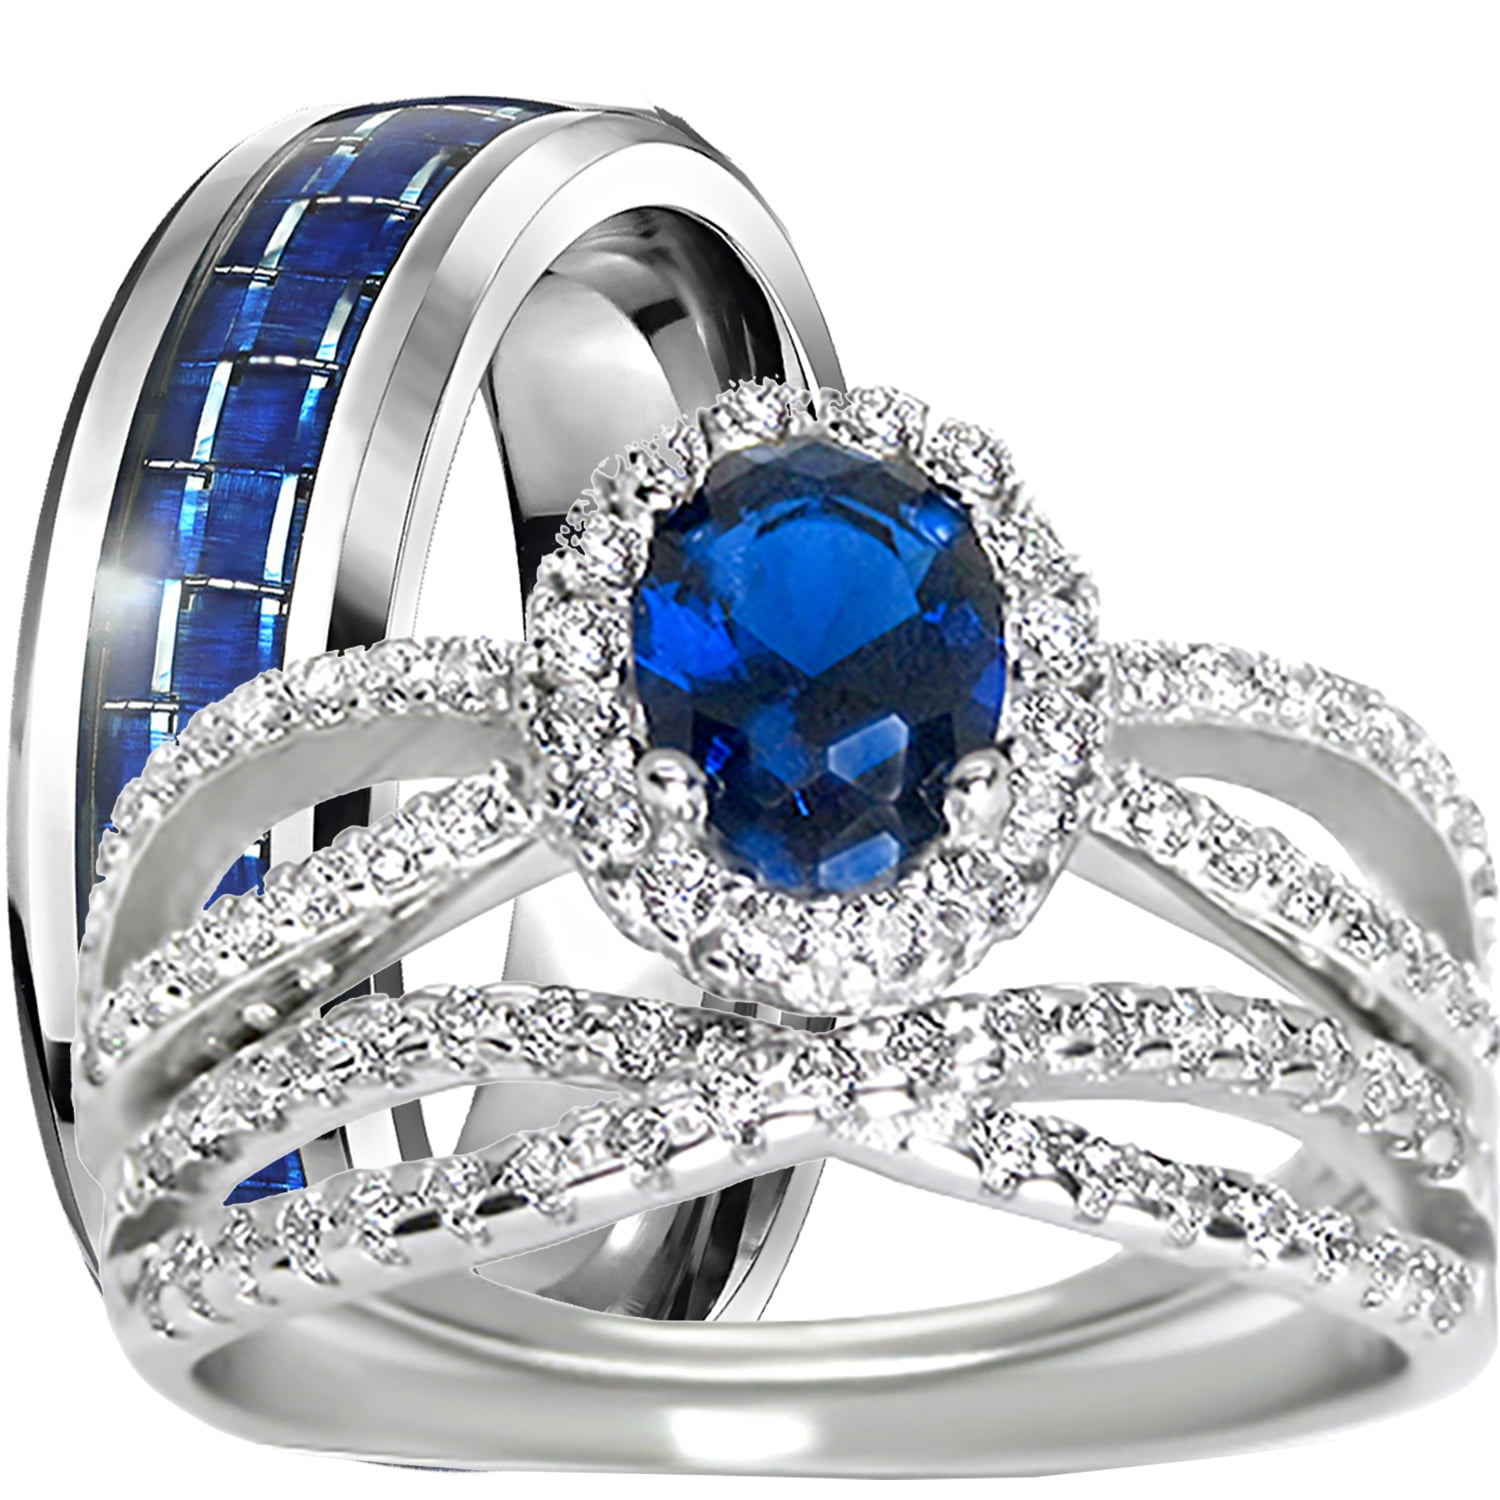 LaRaso & Co His Her Wedding Rings Set Simulated Sapphire Jewelry ...